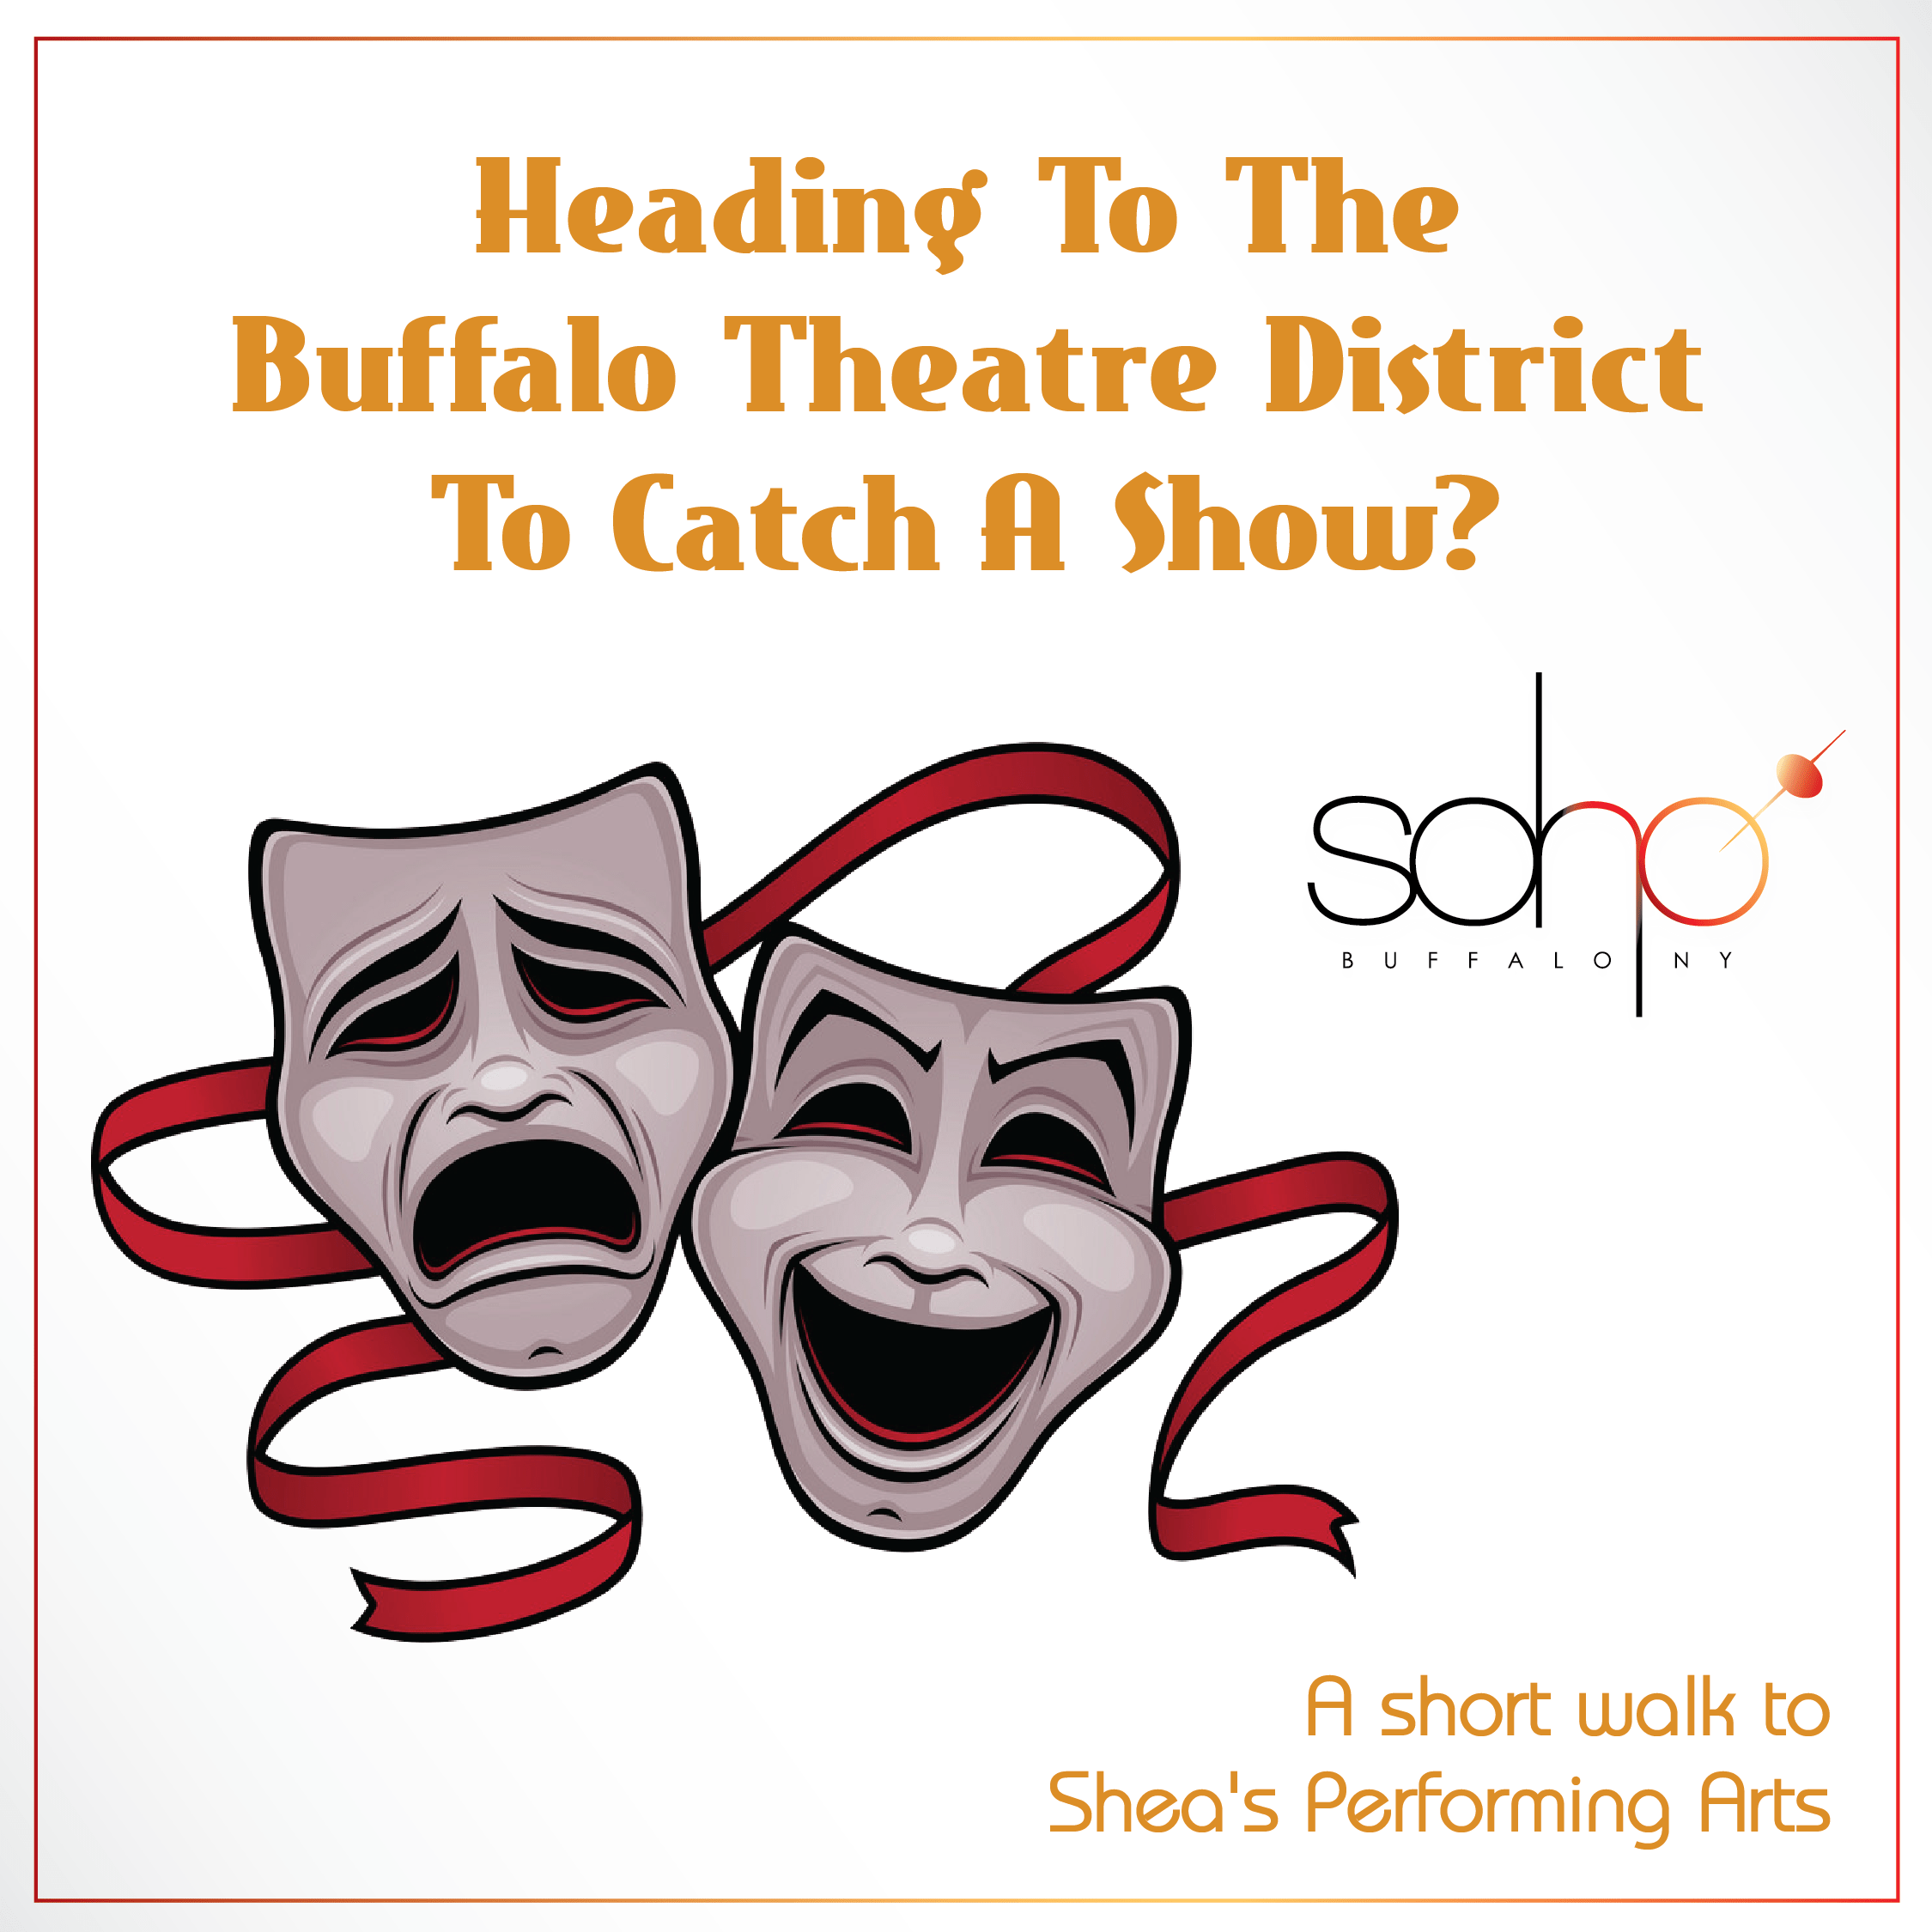 Heading to the Buffalo Theater District to catch a show?